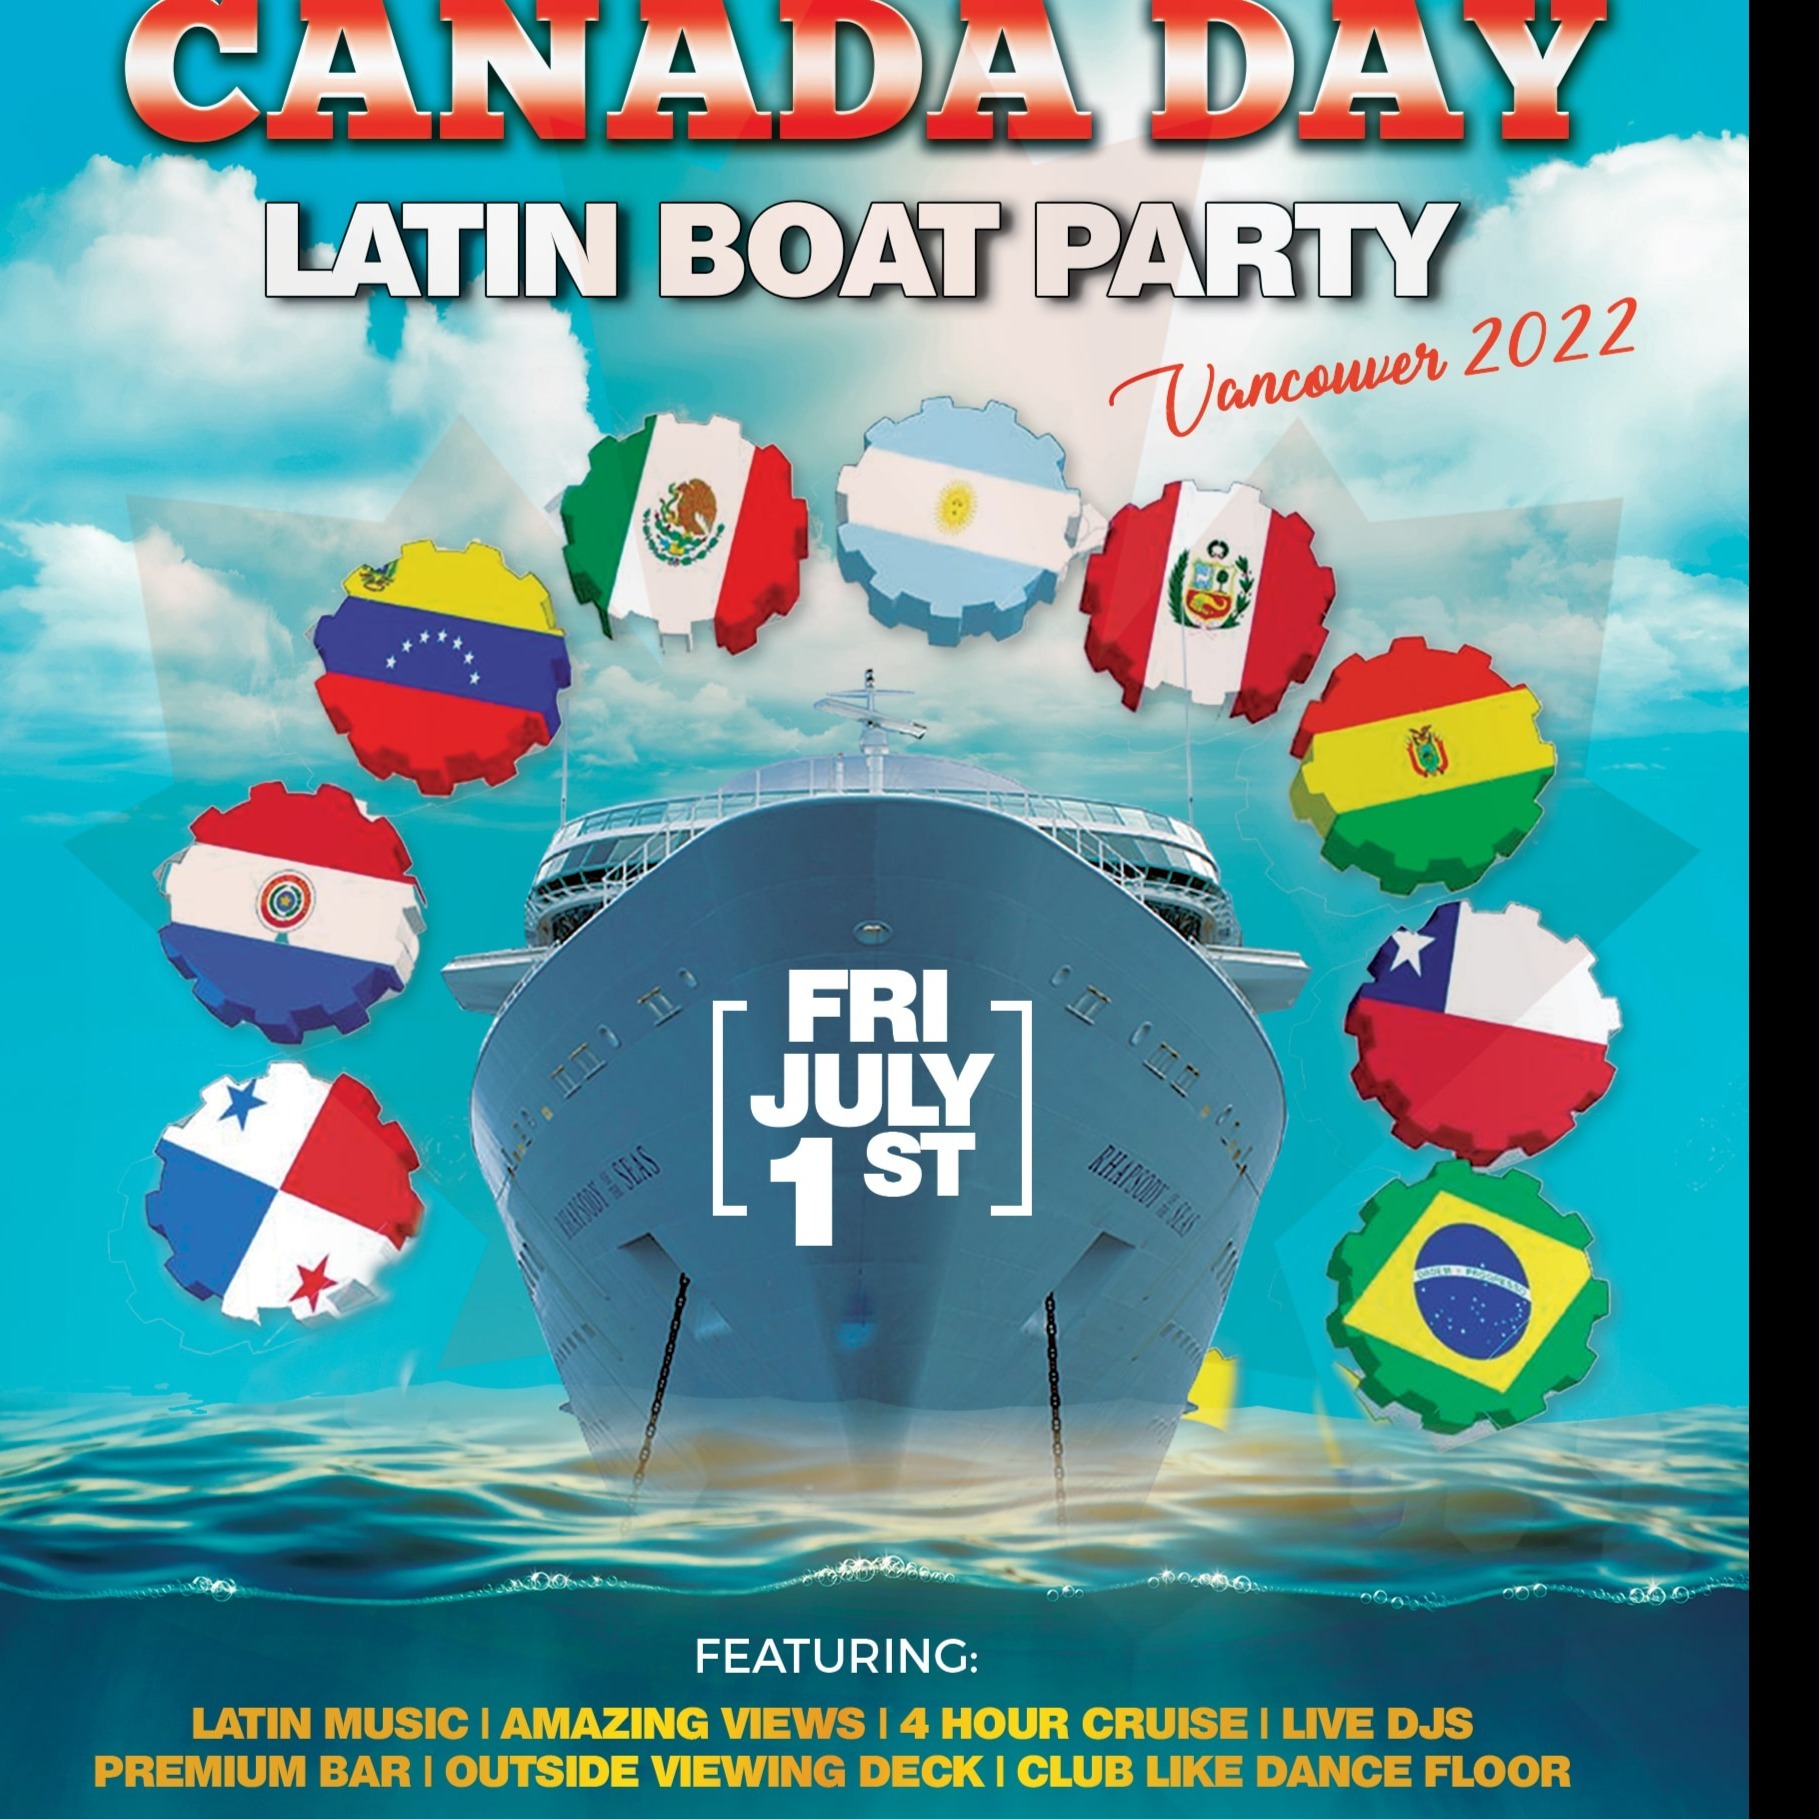 Vancouver Latin Boat Party | Canada Day July 1st | Tickets Starting at $25